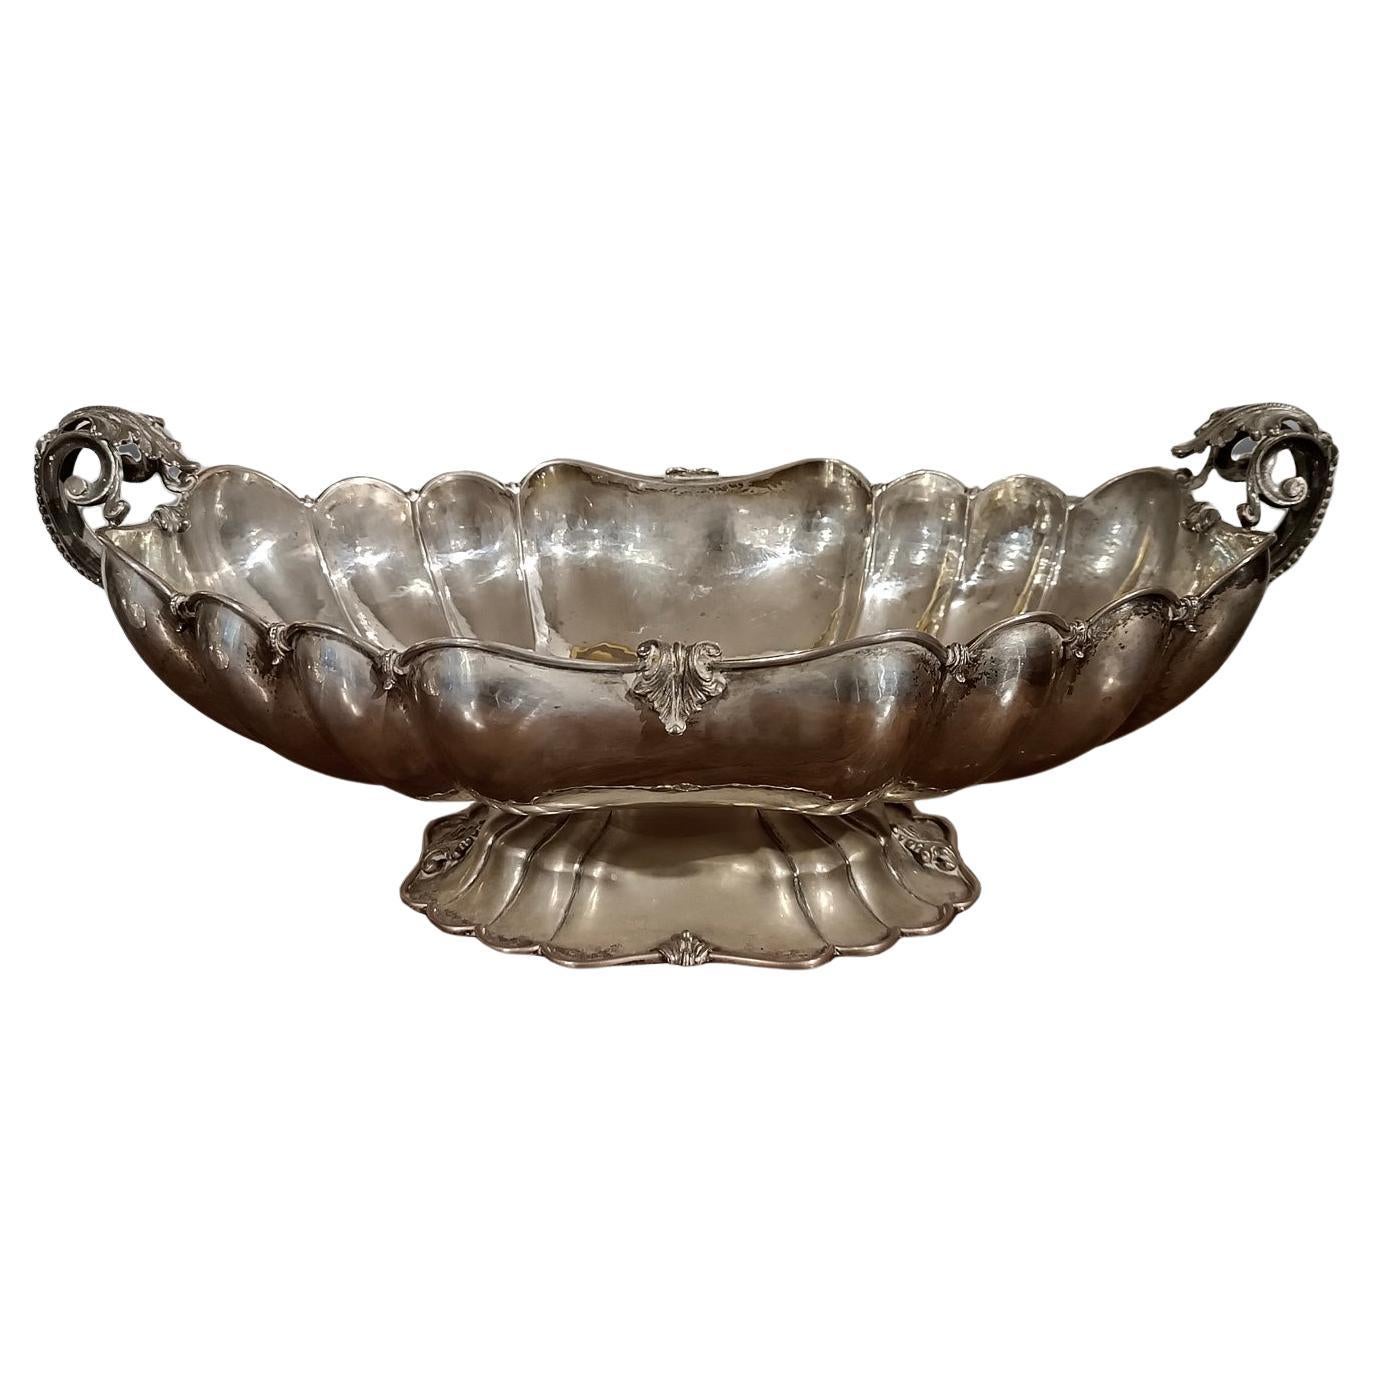 LATE 19th-EARLY 20th CENTURY ITALIAN SILVER CENTERPIECE For Sale